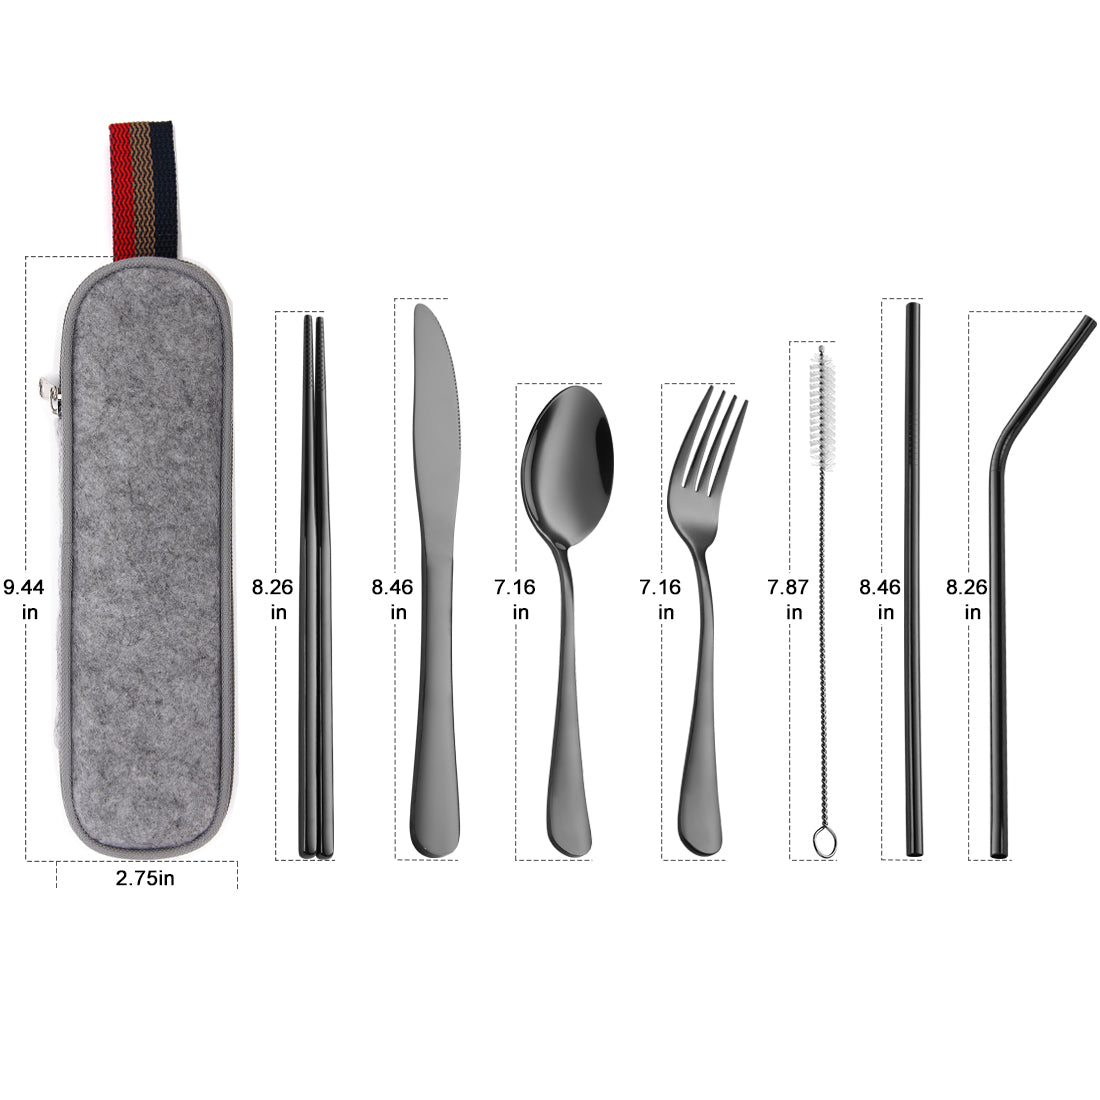 Travel Cutlery Set with Case Portable Silverware Utensils Set,4-pieces  Stainless Steel Reusable Flatware Set for Camping Picnic Hiking Office